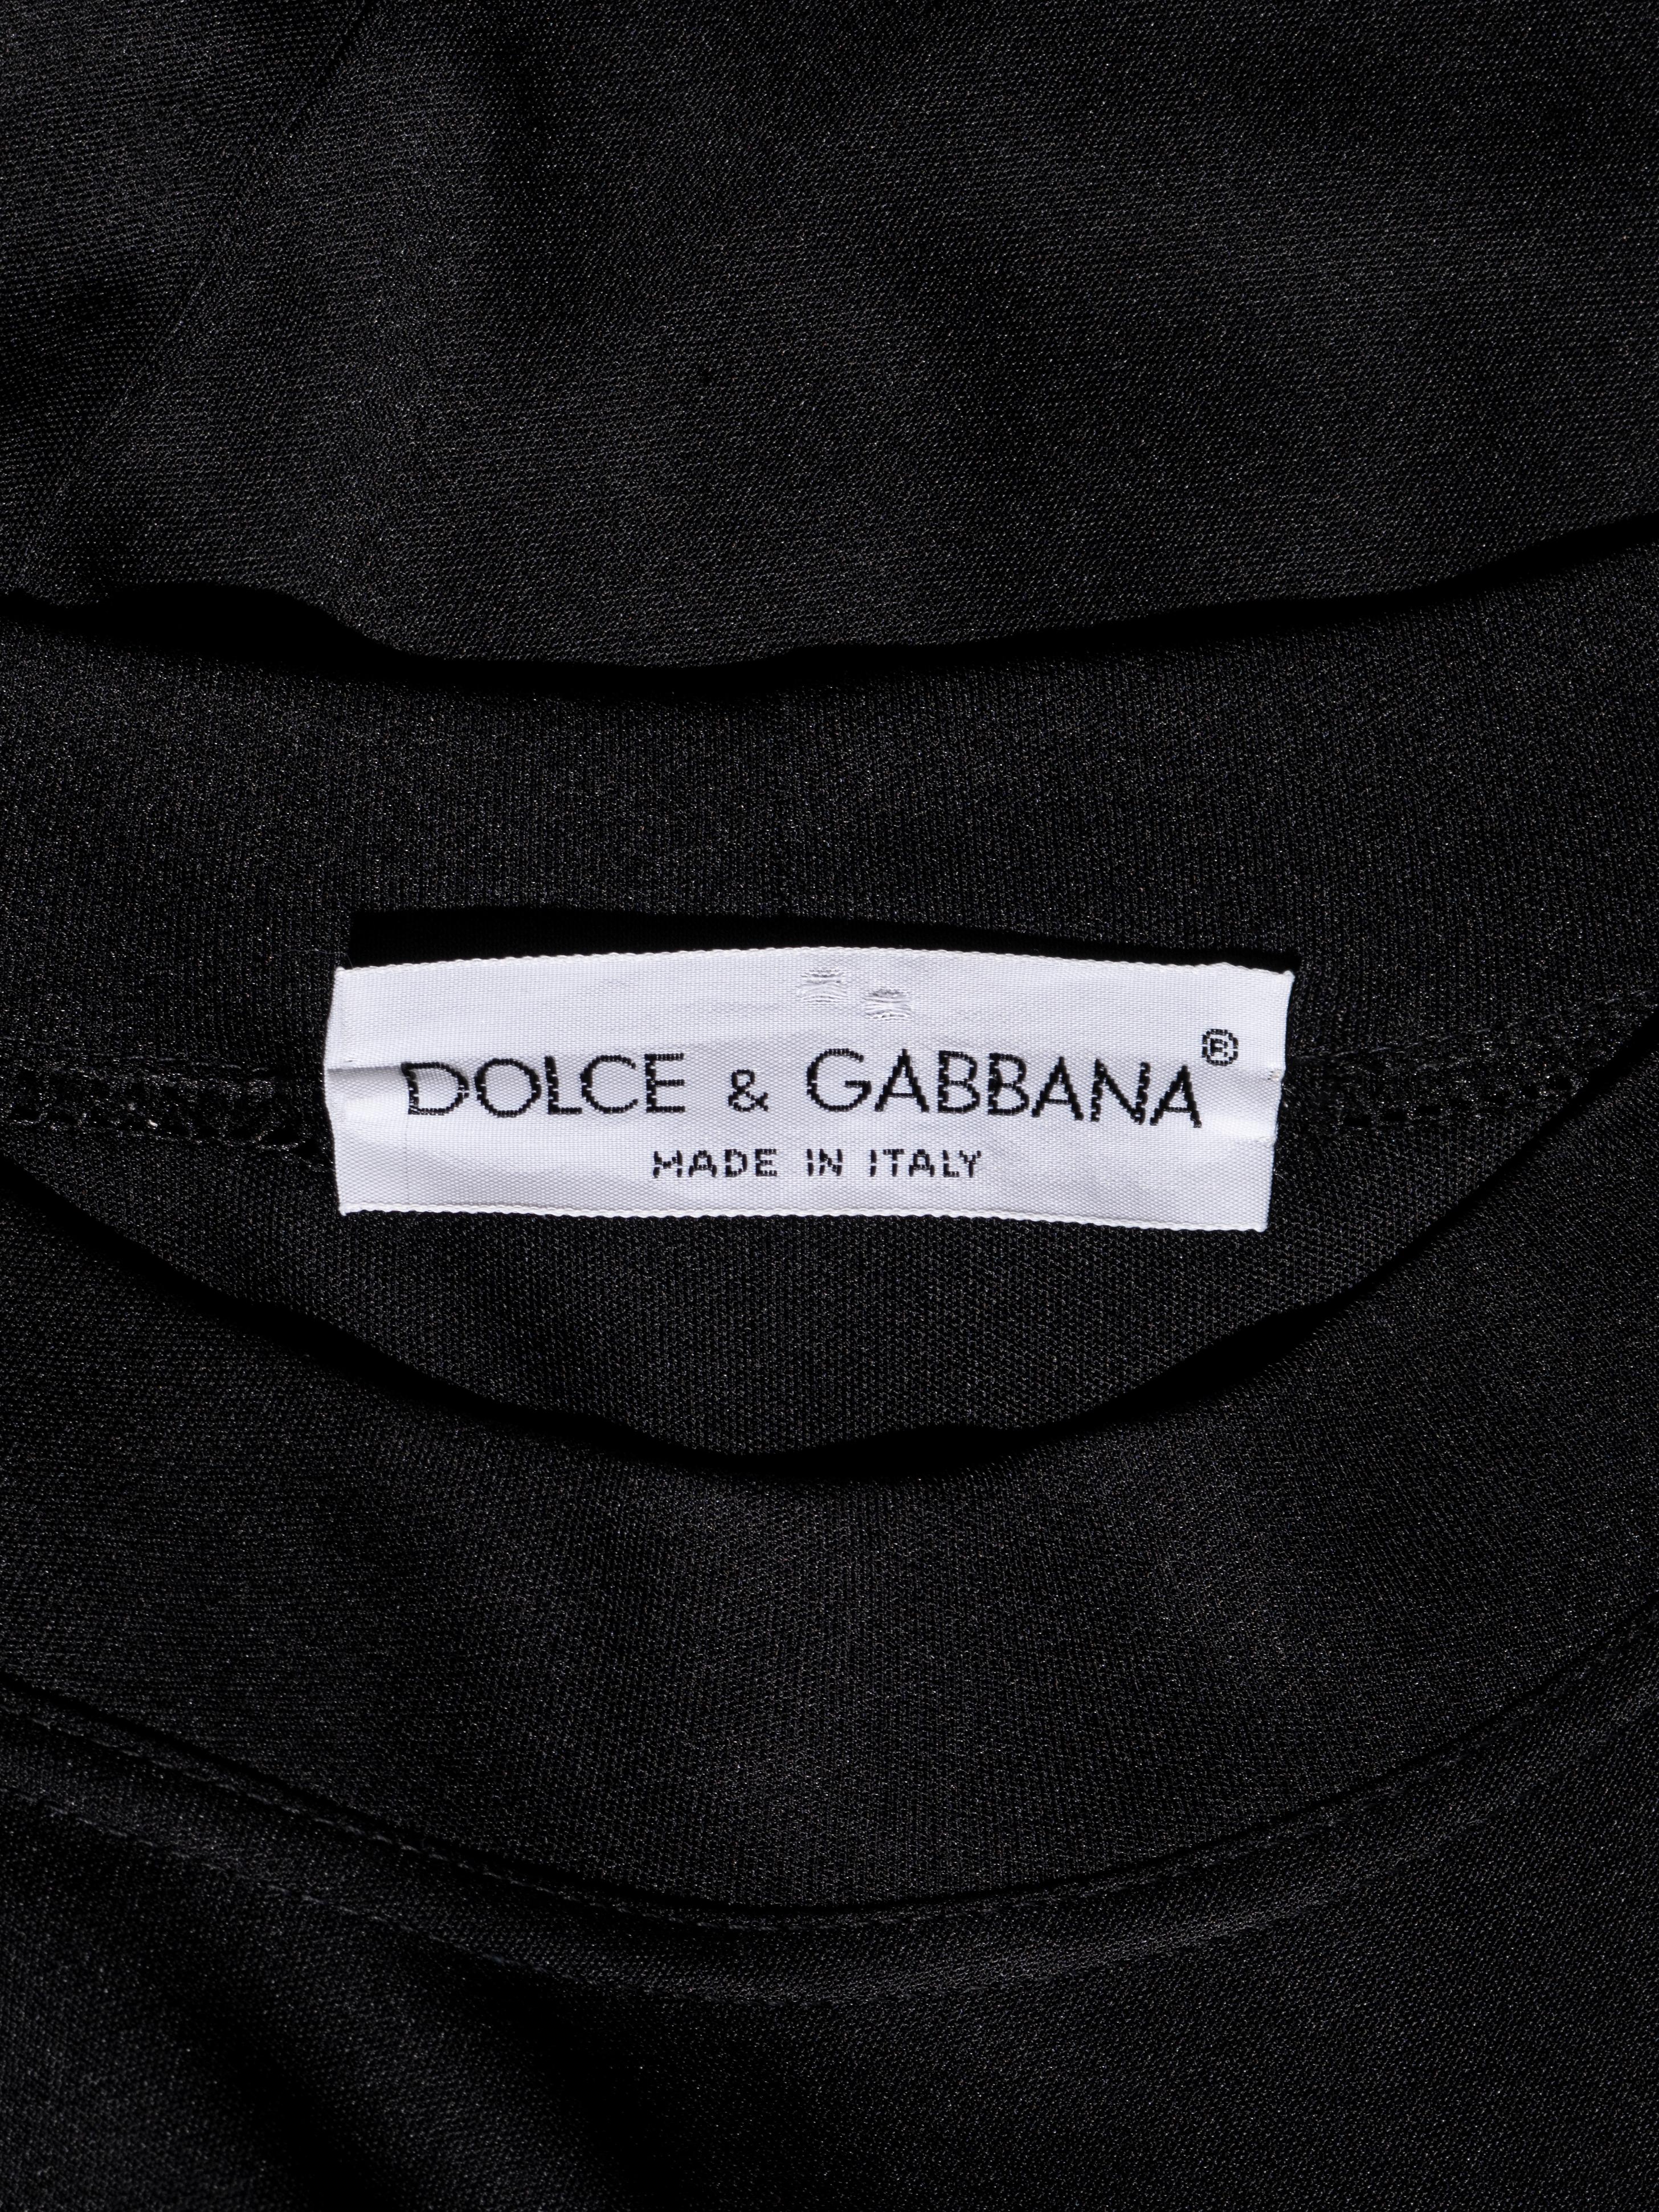 Dolce & Gabbana black jersey maxi dress with adjustable button closures, fw 1987 For Sale 5